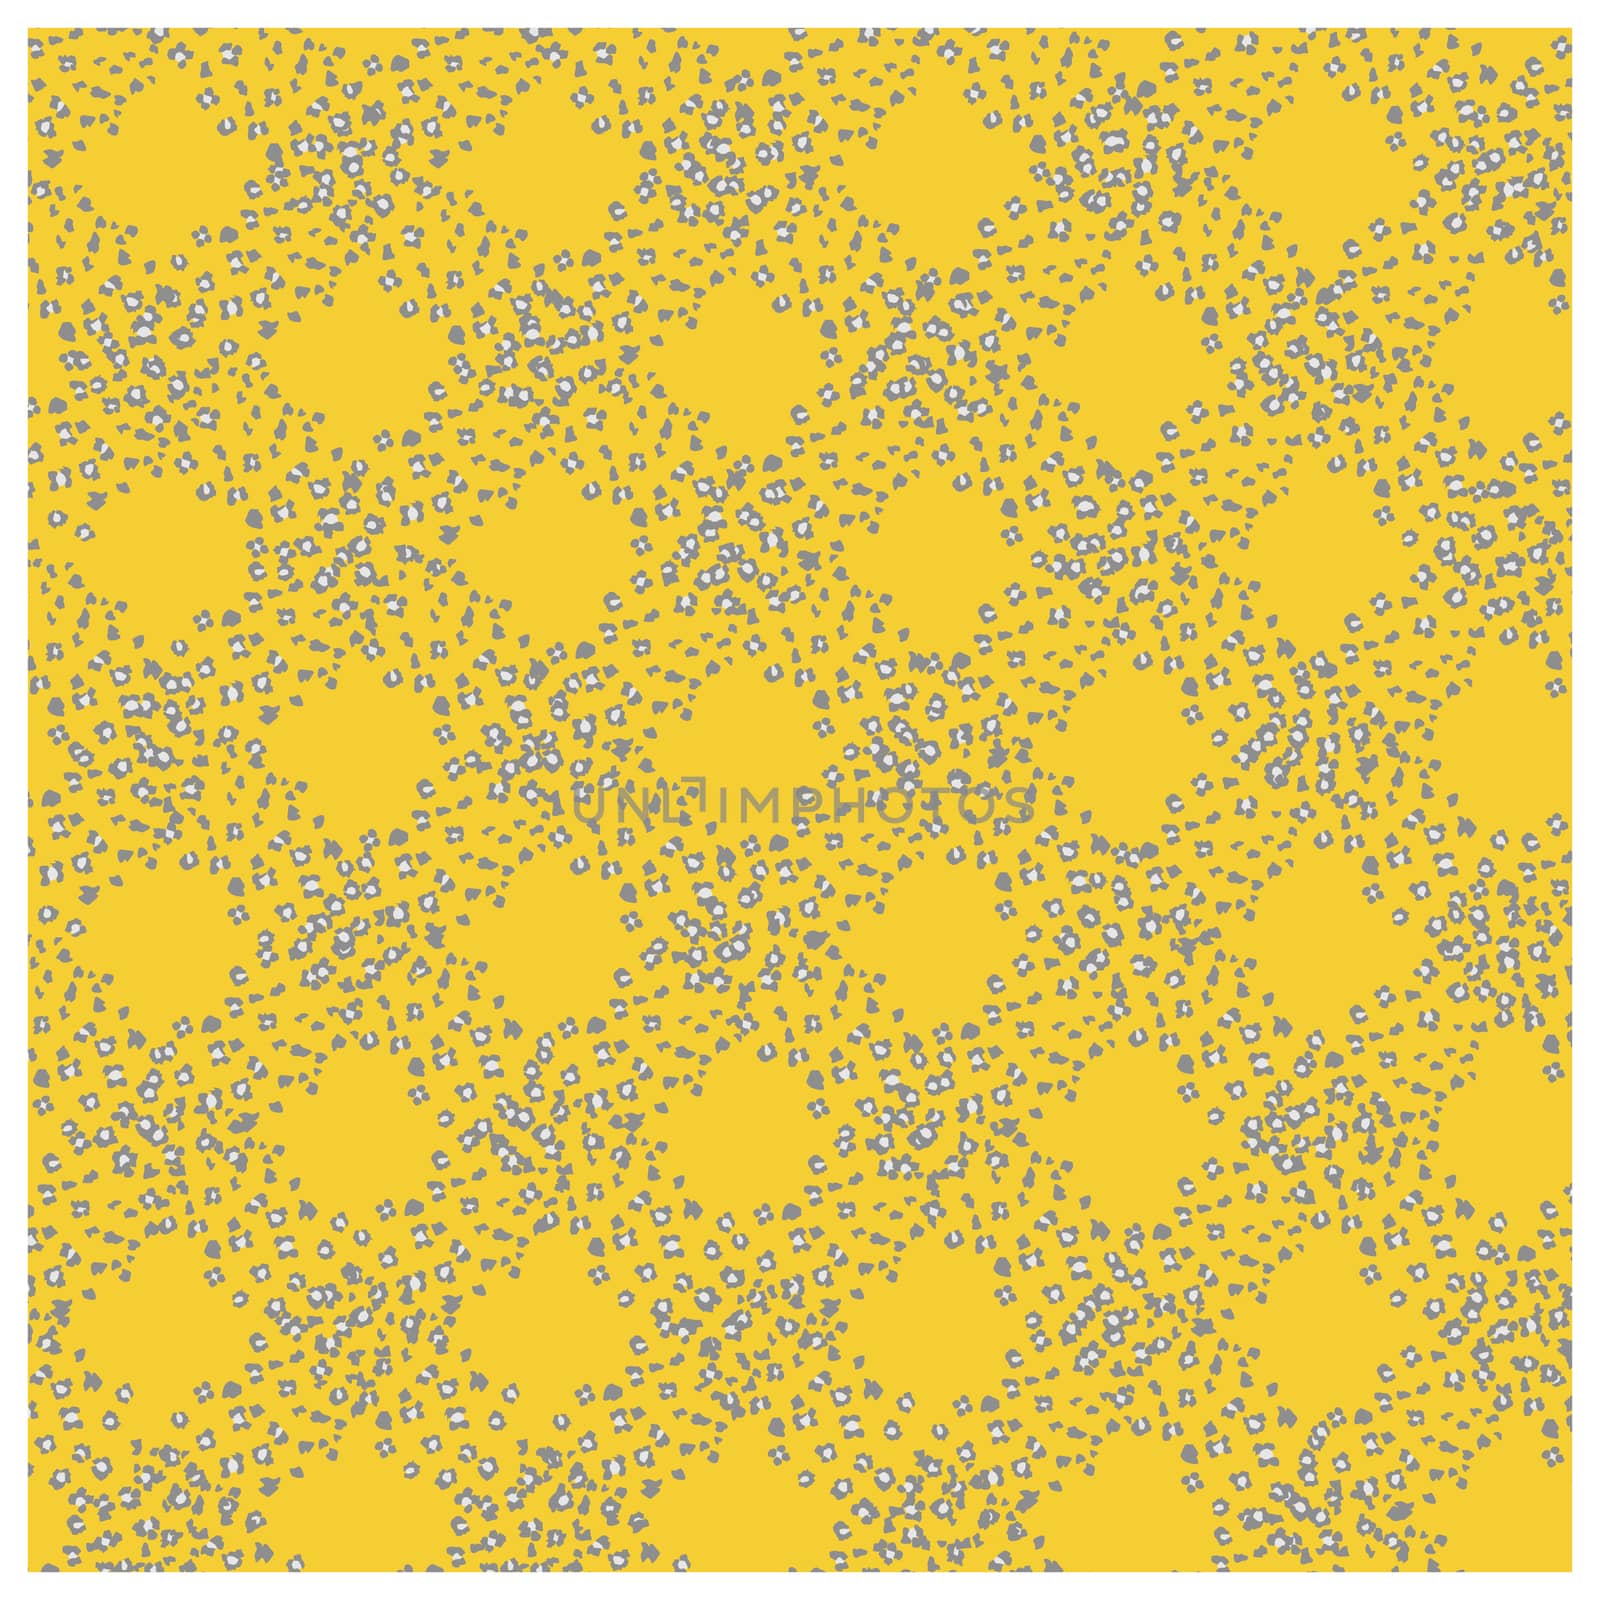 Animal print seamless pattern. Mustard yellow background. Animal ornament illustration. Sketch wrapping paper, textile, background.